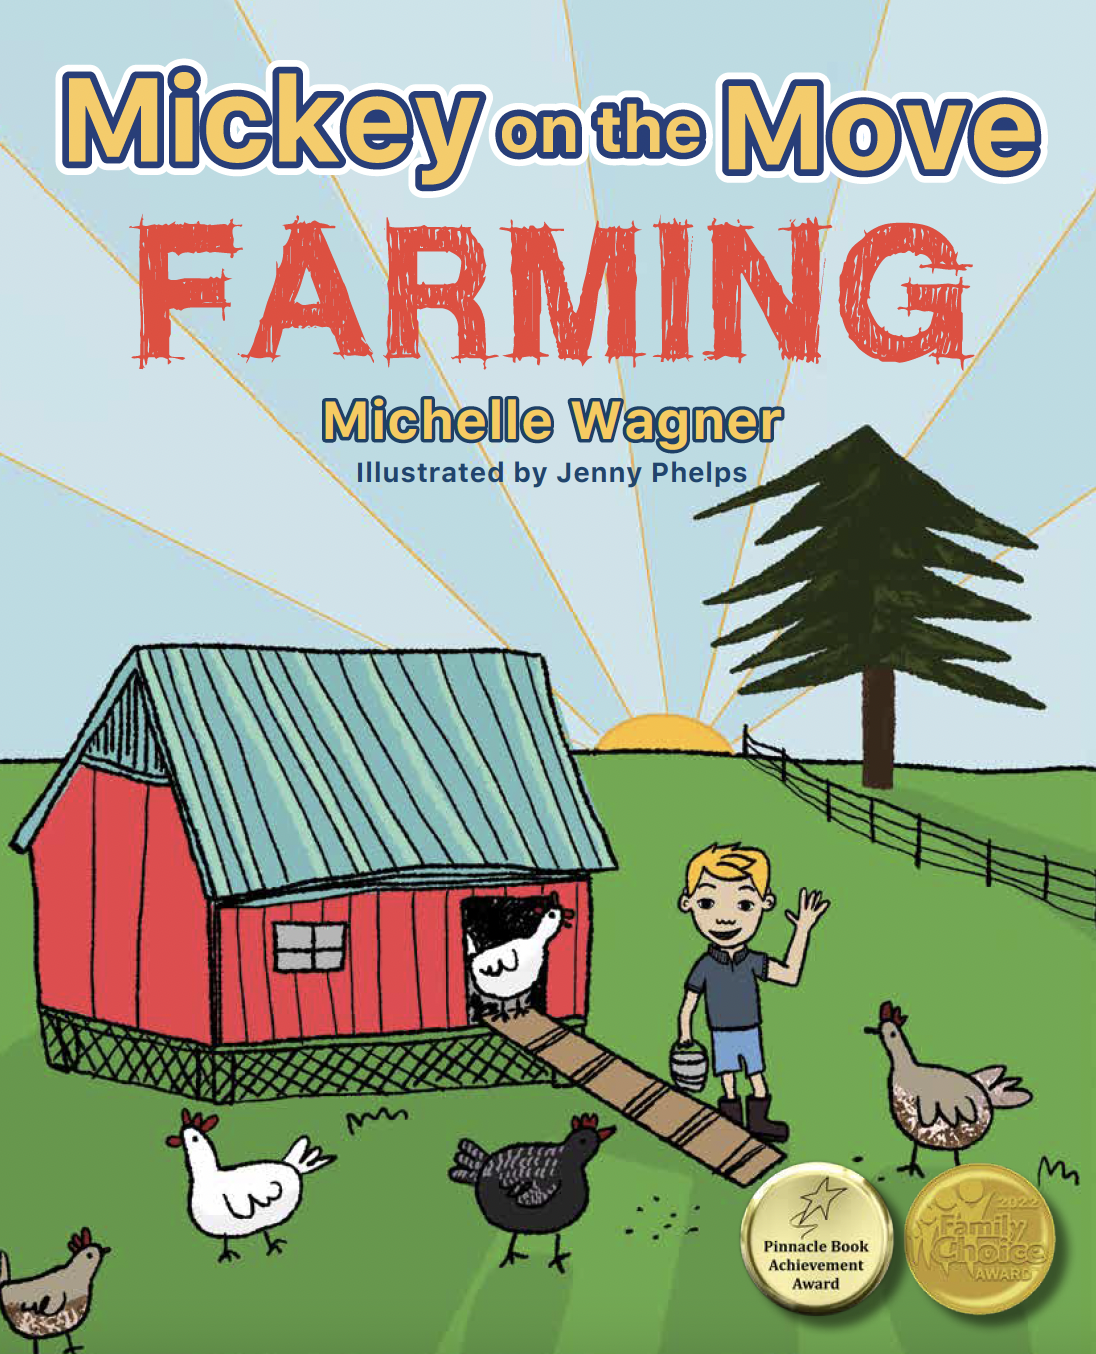 MICKEY ON THE MOVE FARMING by Michelle Wagner